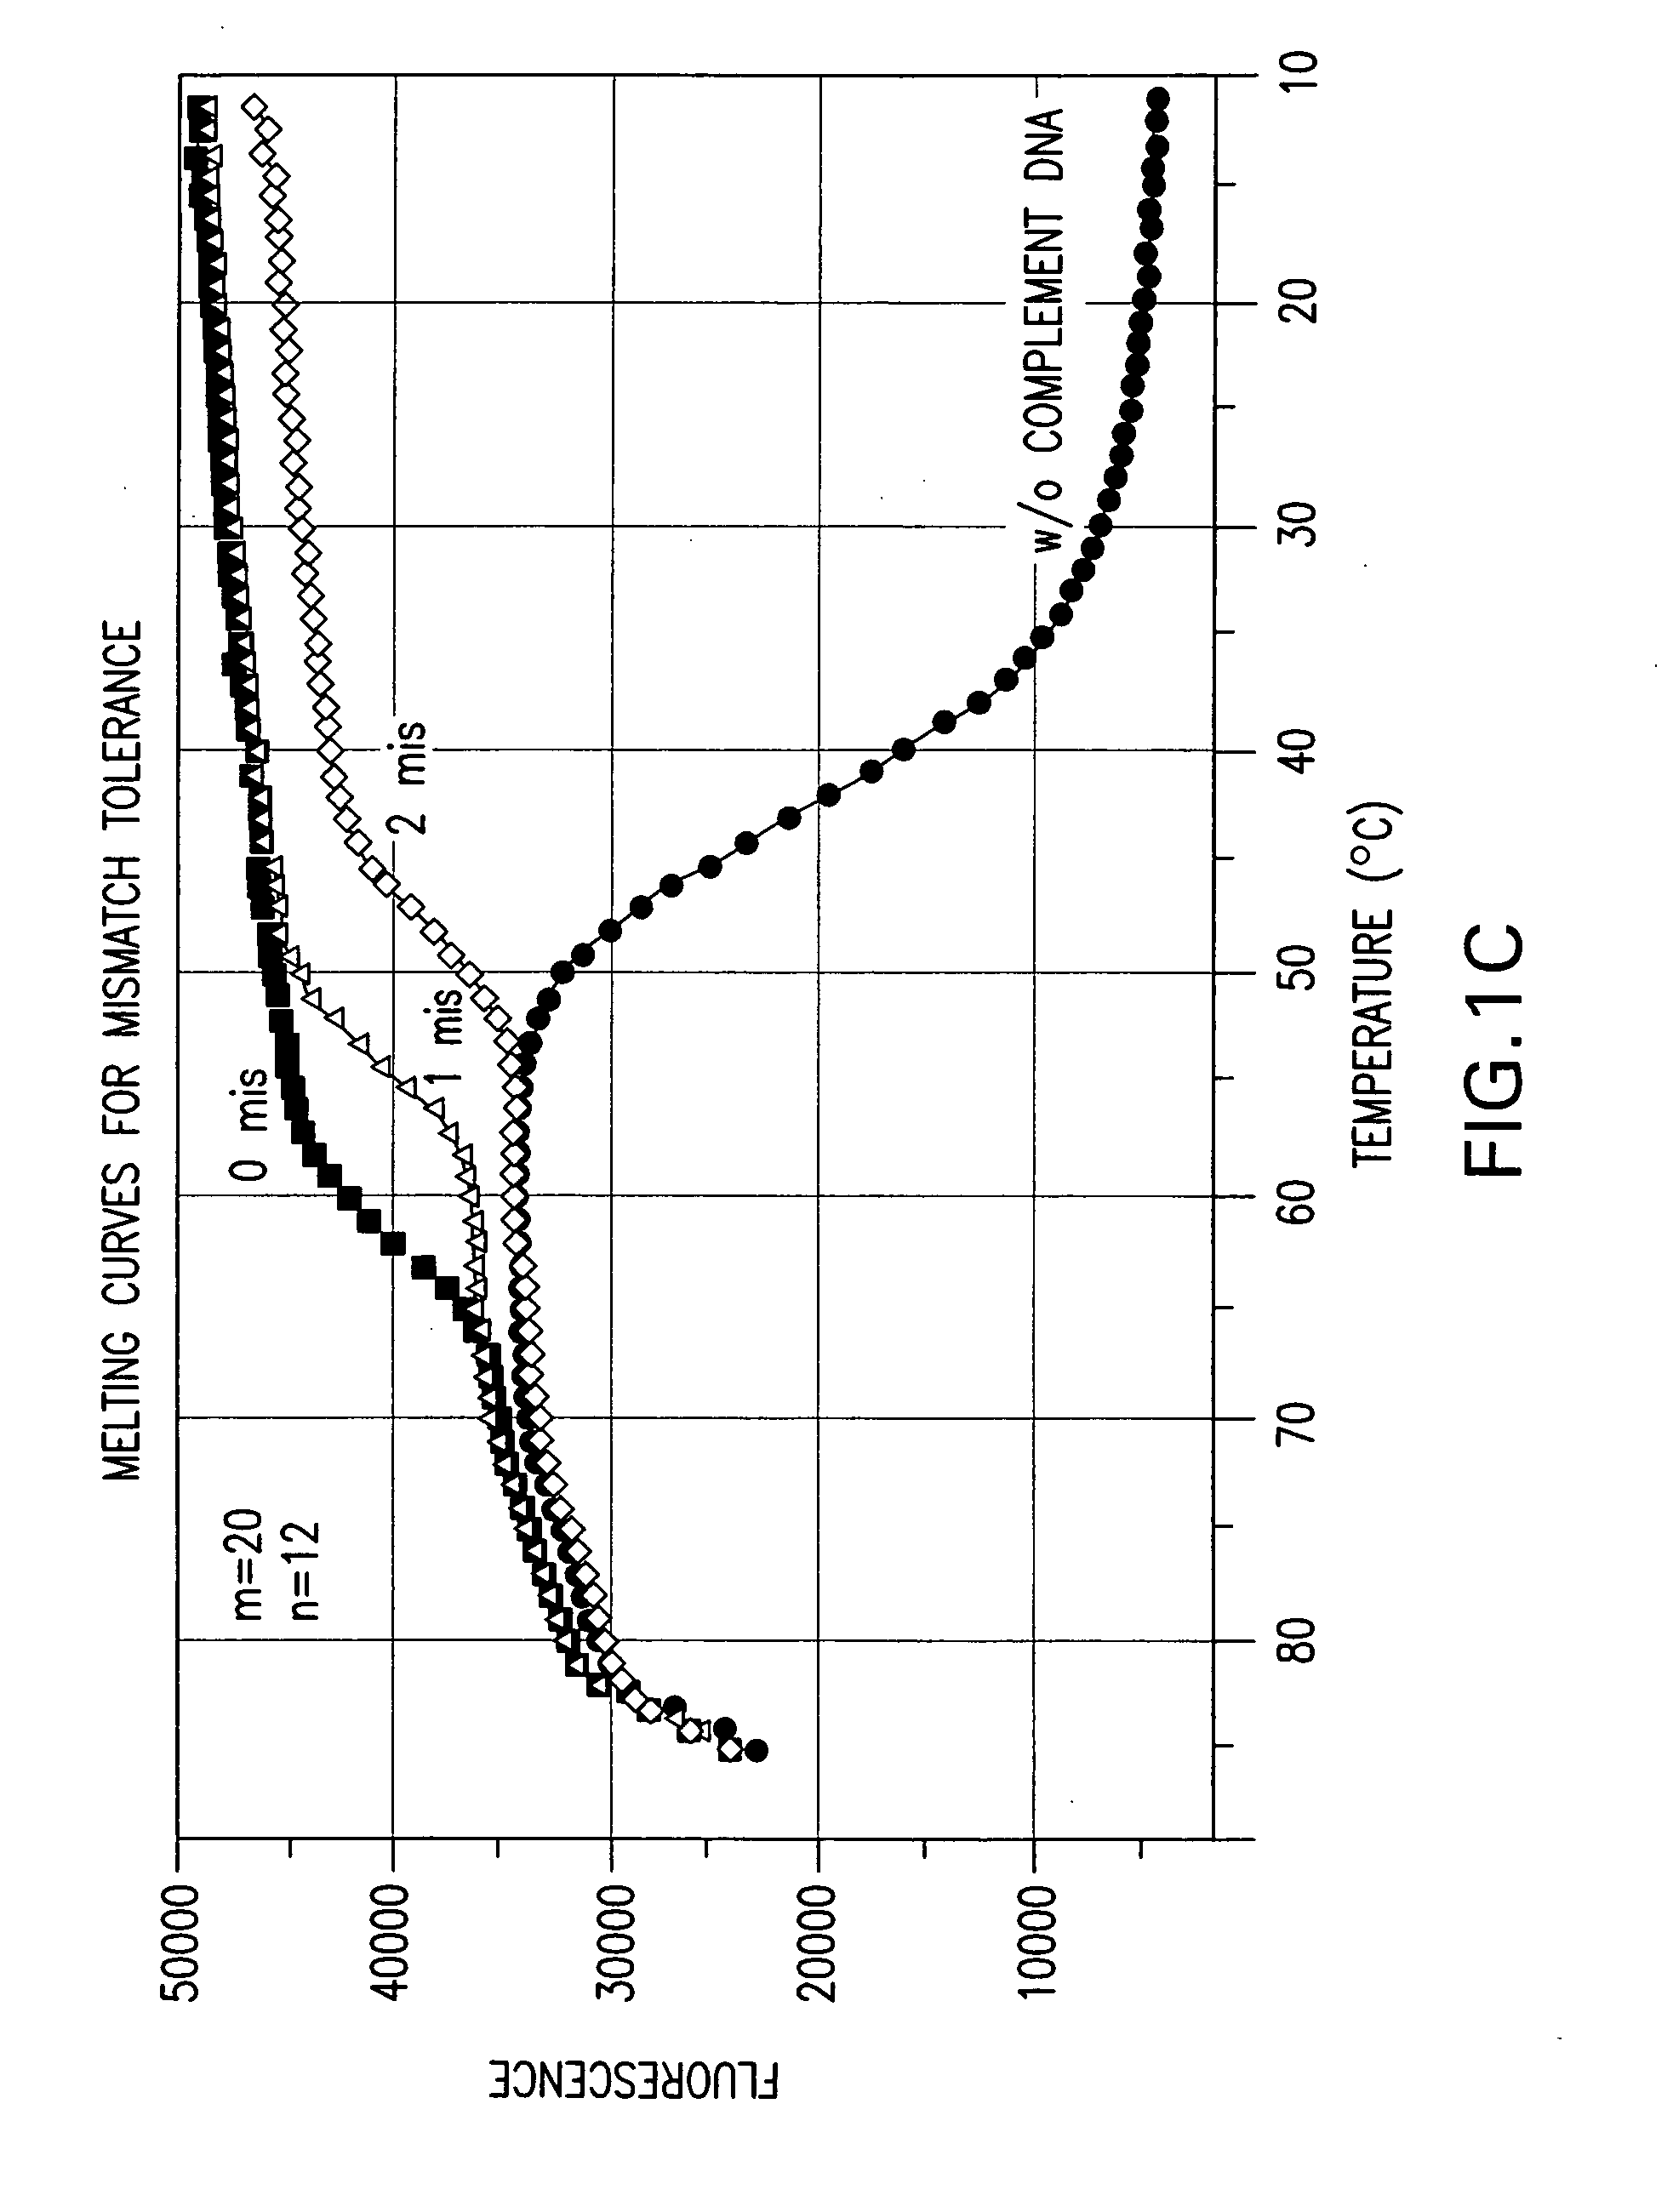 Double stranded linear nucleic acid probe and uses thereof